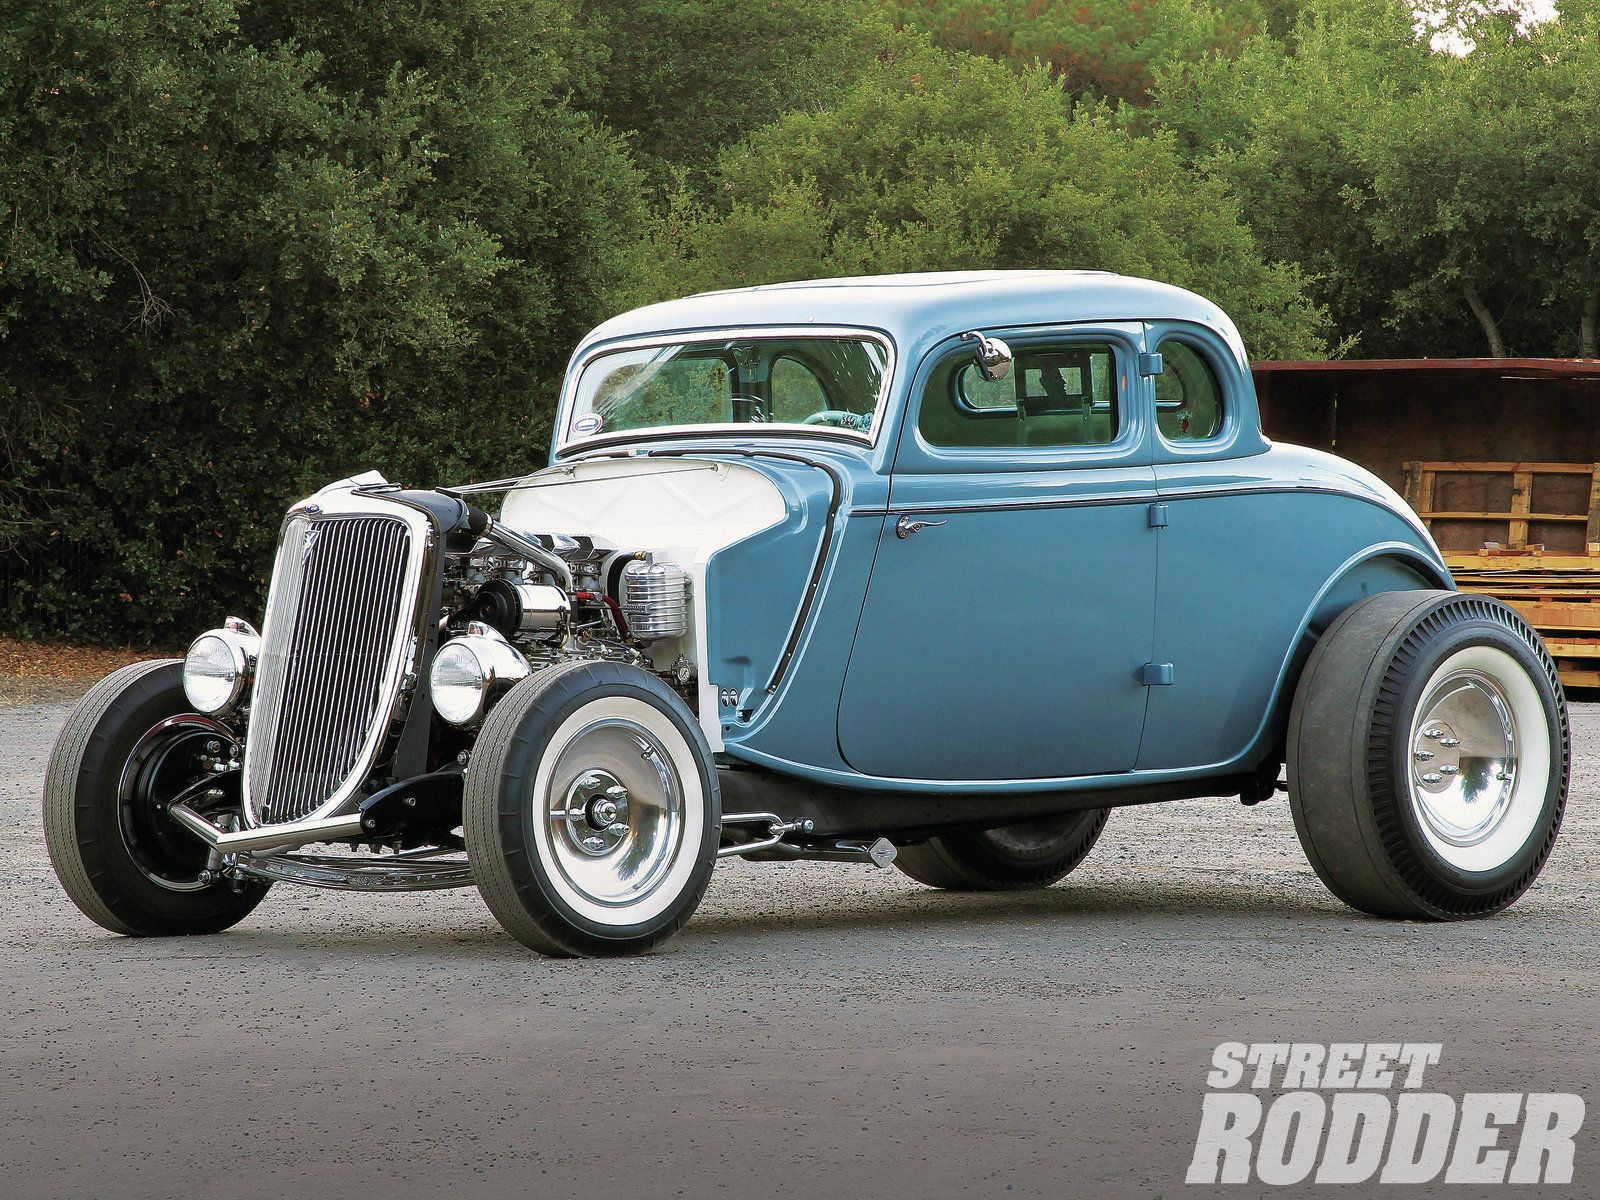 1933 Ford Coupe Wallpapers